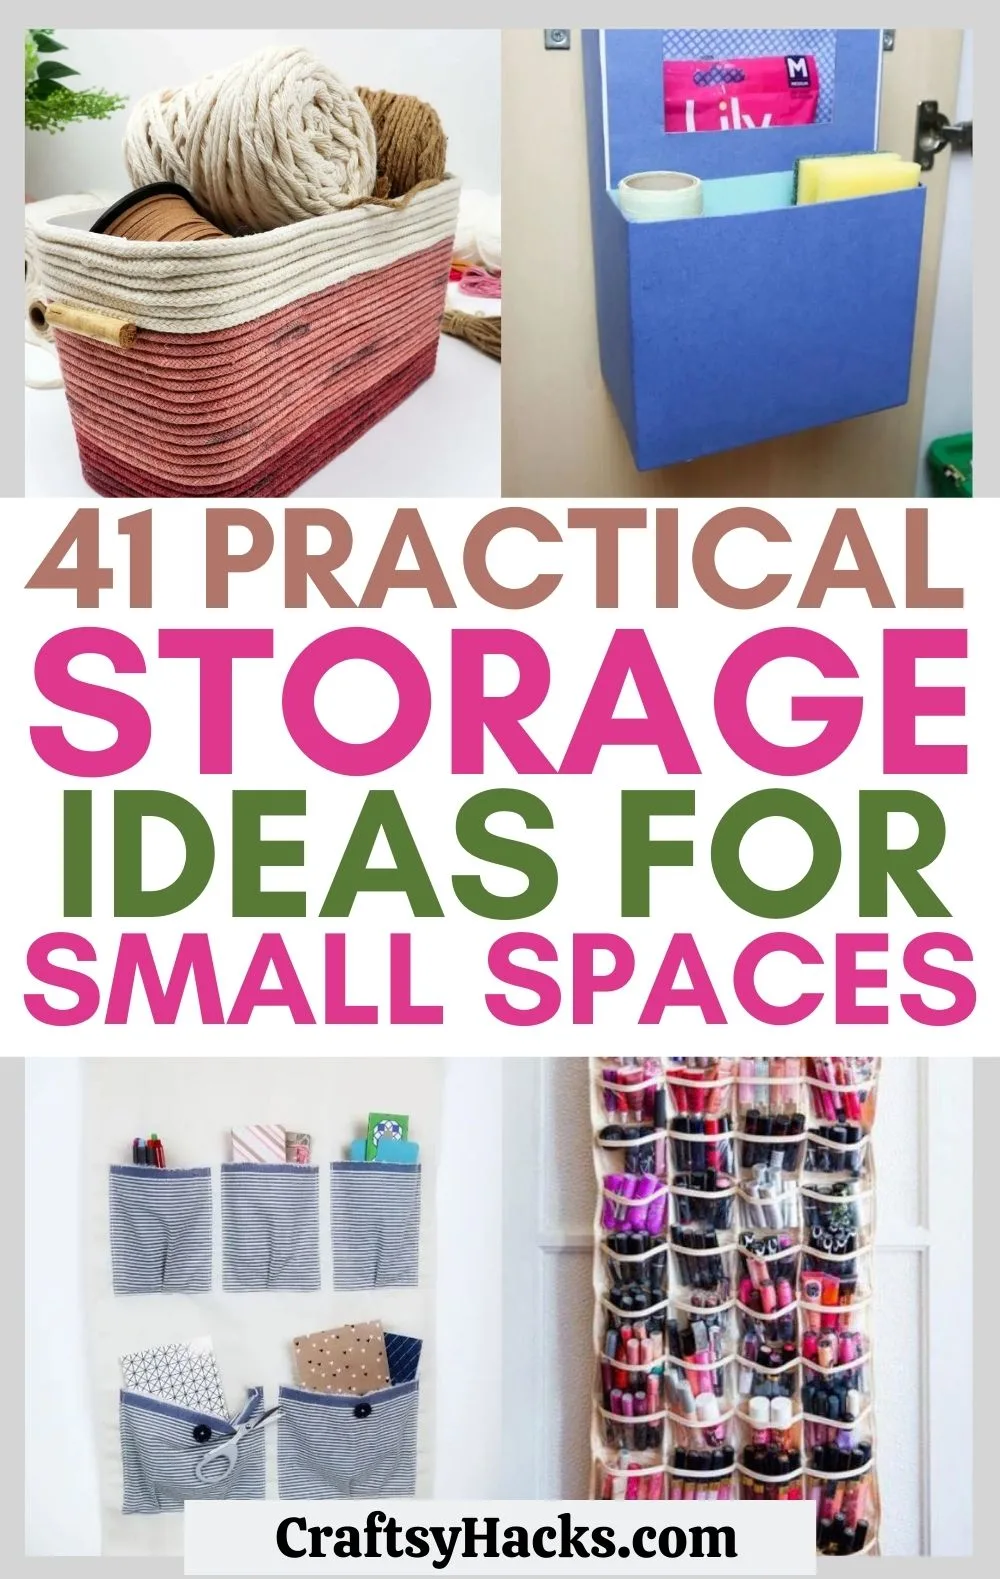 Clever DIY Storage for Small Spaces